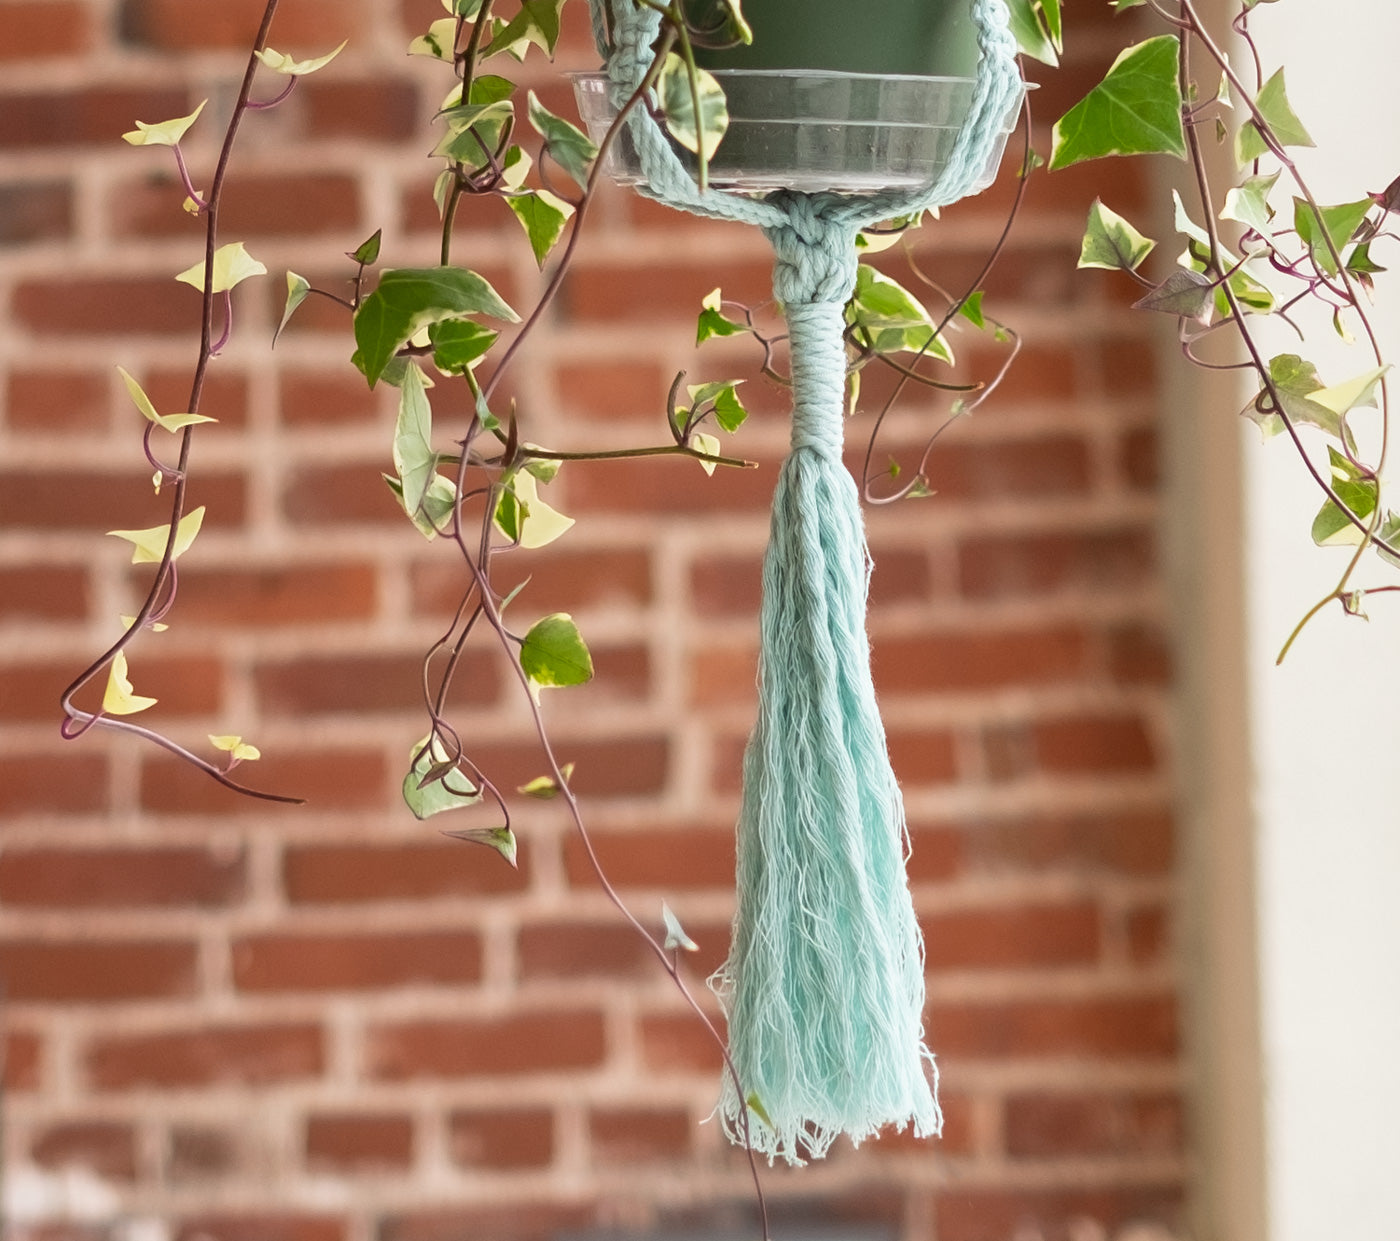 The bottom of a mint green macramé plant hanger, a large central knot firmly holds the bottom of a plant pot, then several inches of cord is wrapped tightly, before a foot or so of brushed out cord dangles to finish off the bottom of the plant hanger. Around this final tassel section a tangle of healthy wax ivy vines float in the air from the plant that the plant hanger holds. 